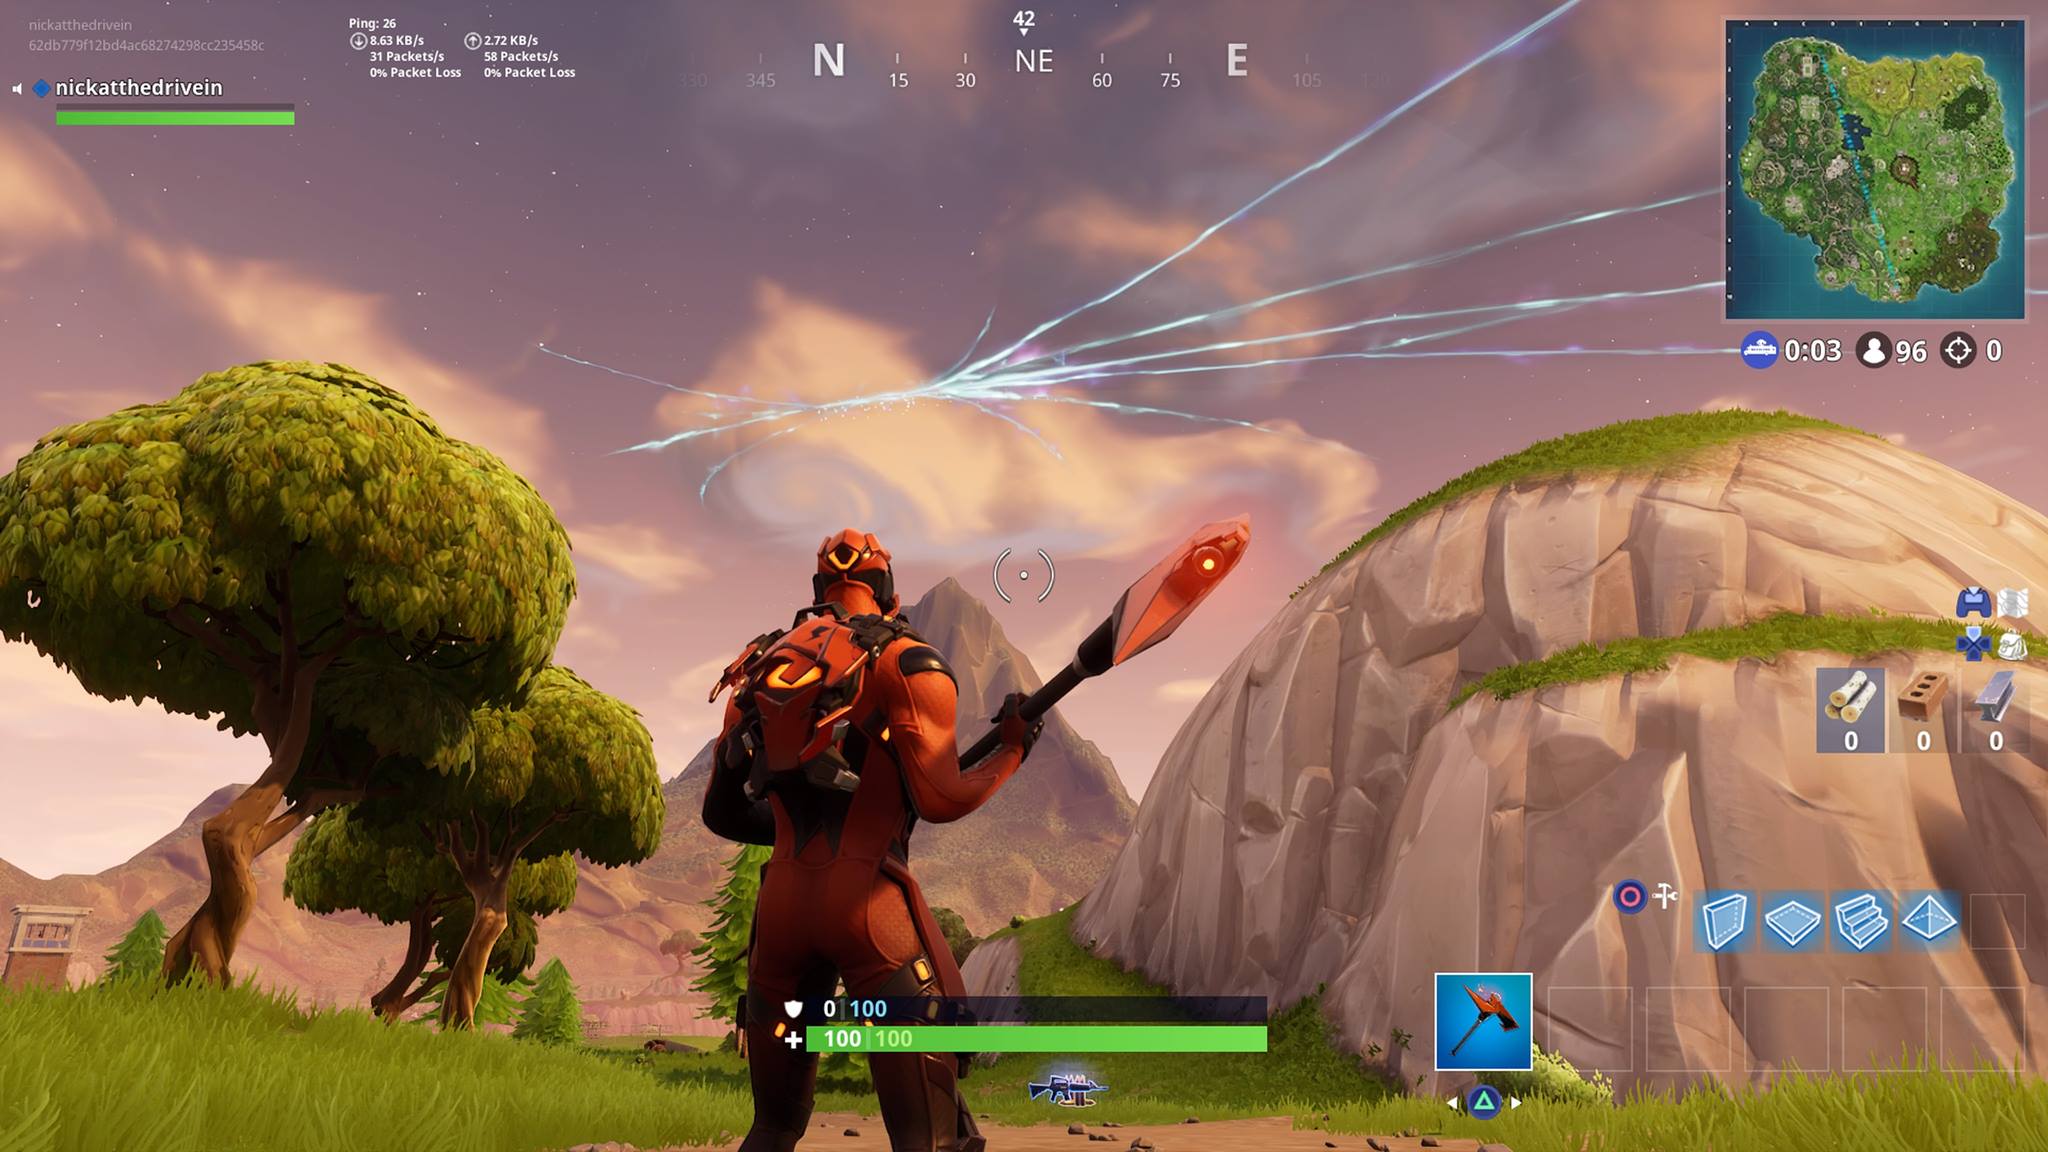 Fortnites rocket launch created a dimensional rift in the sky